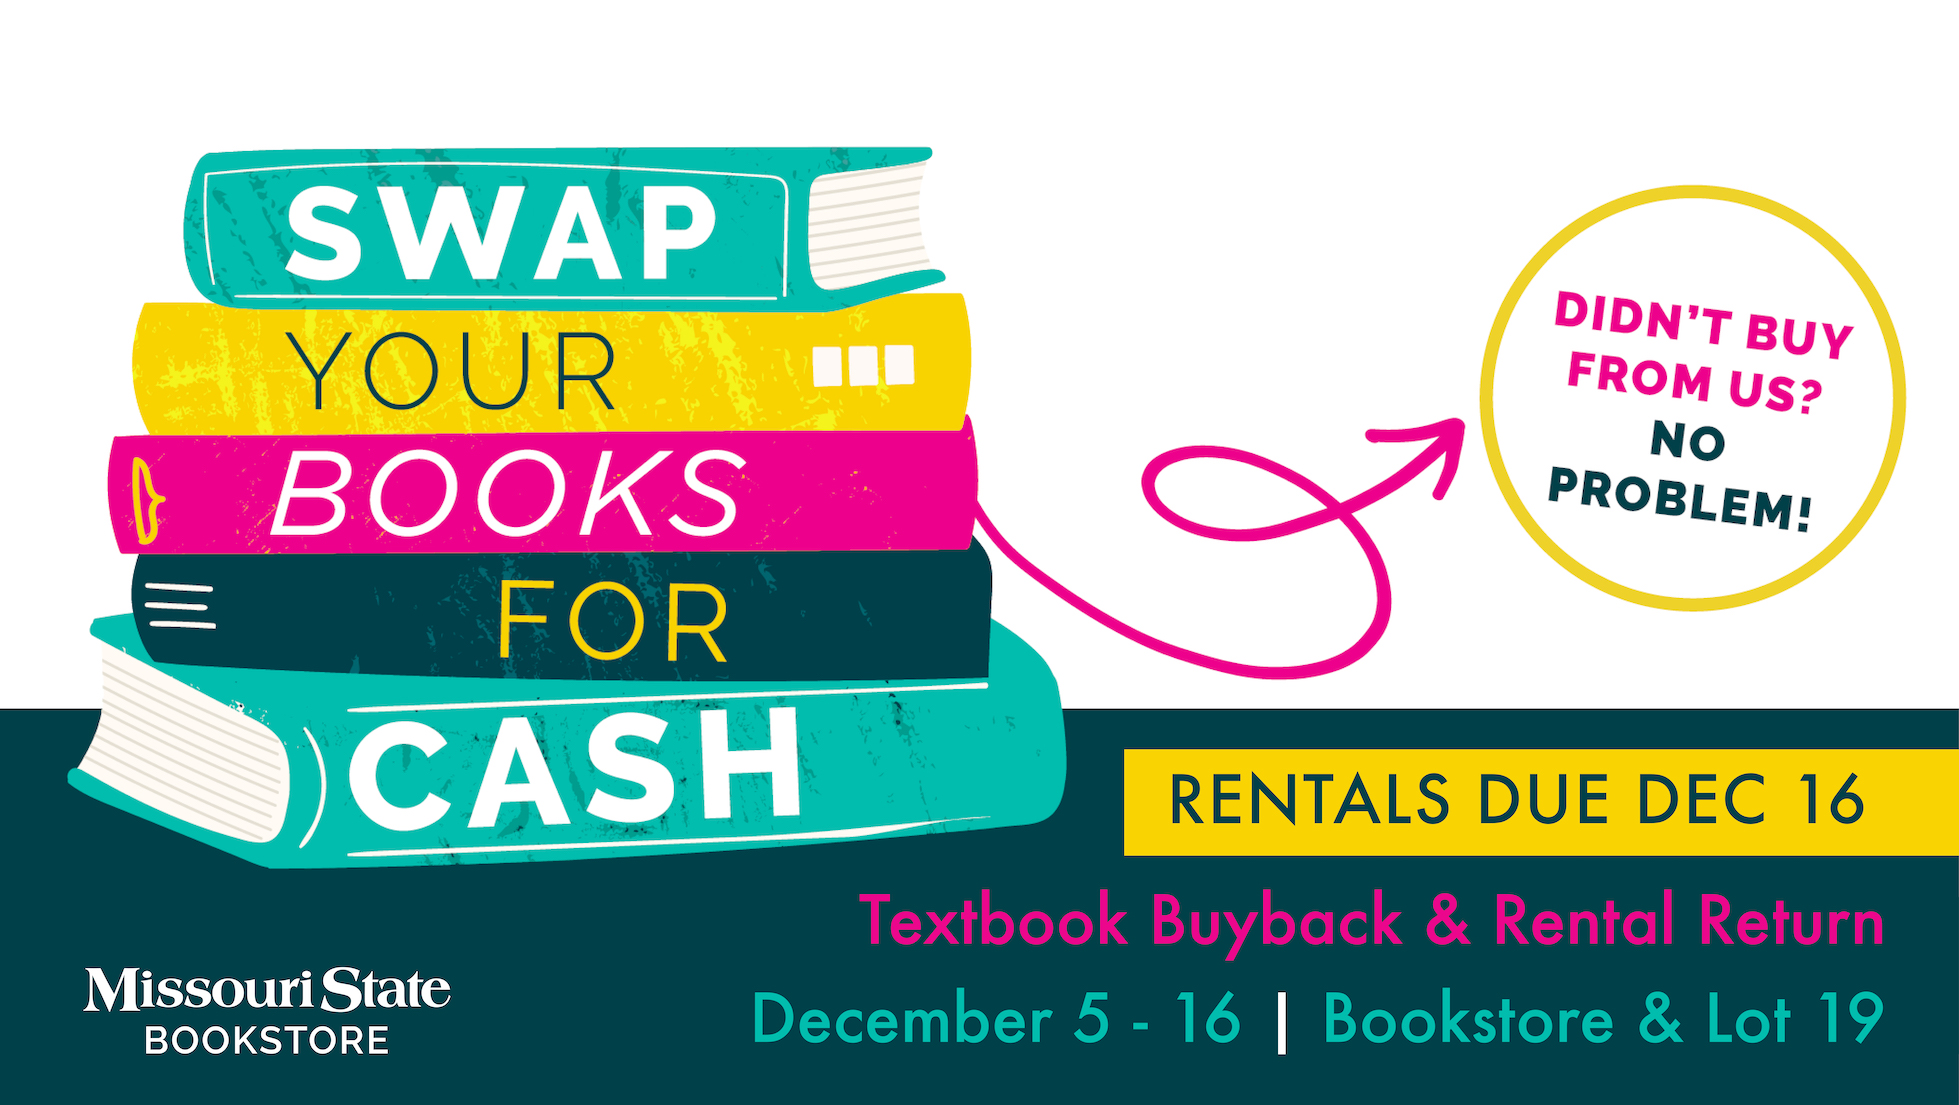 Swap your Textbooks for Cash at the Bookstore through December 1st